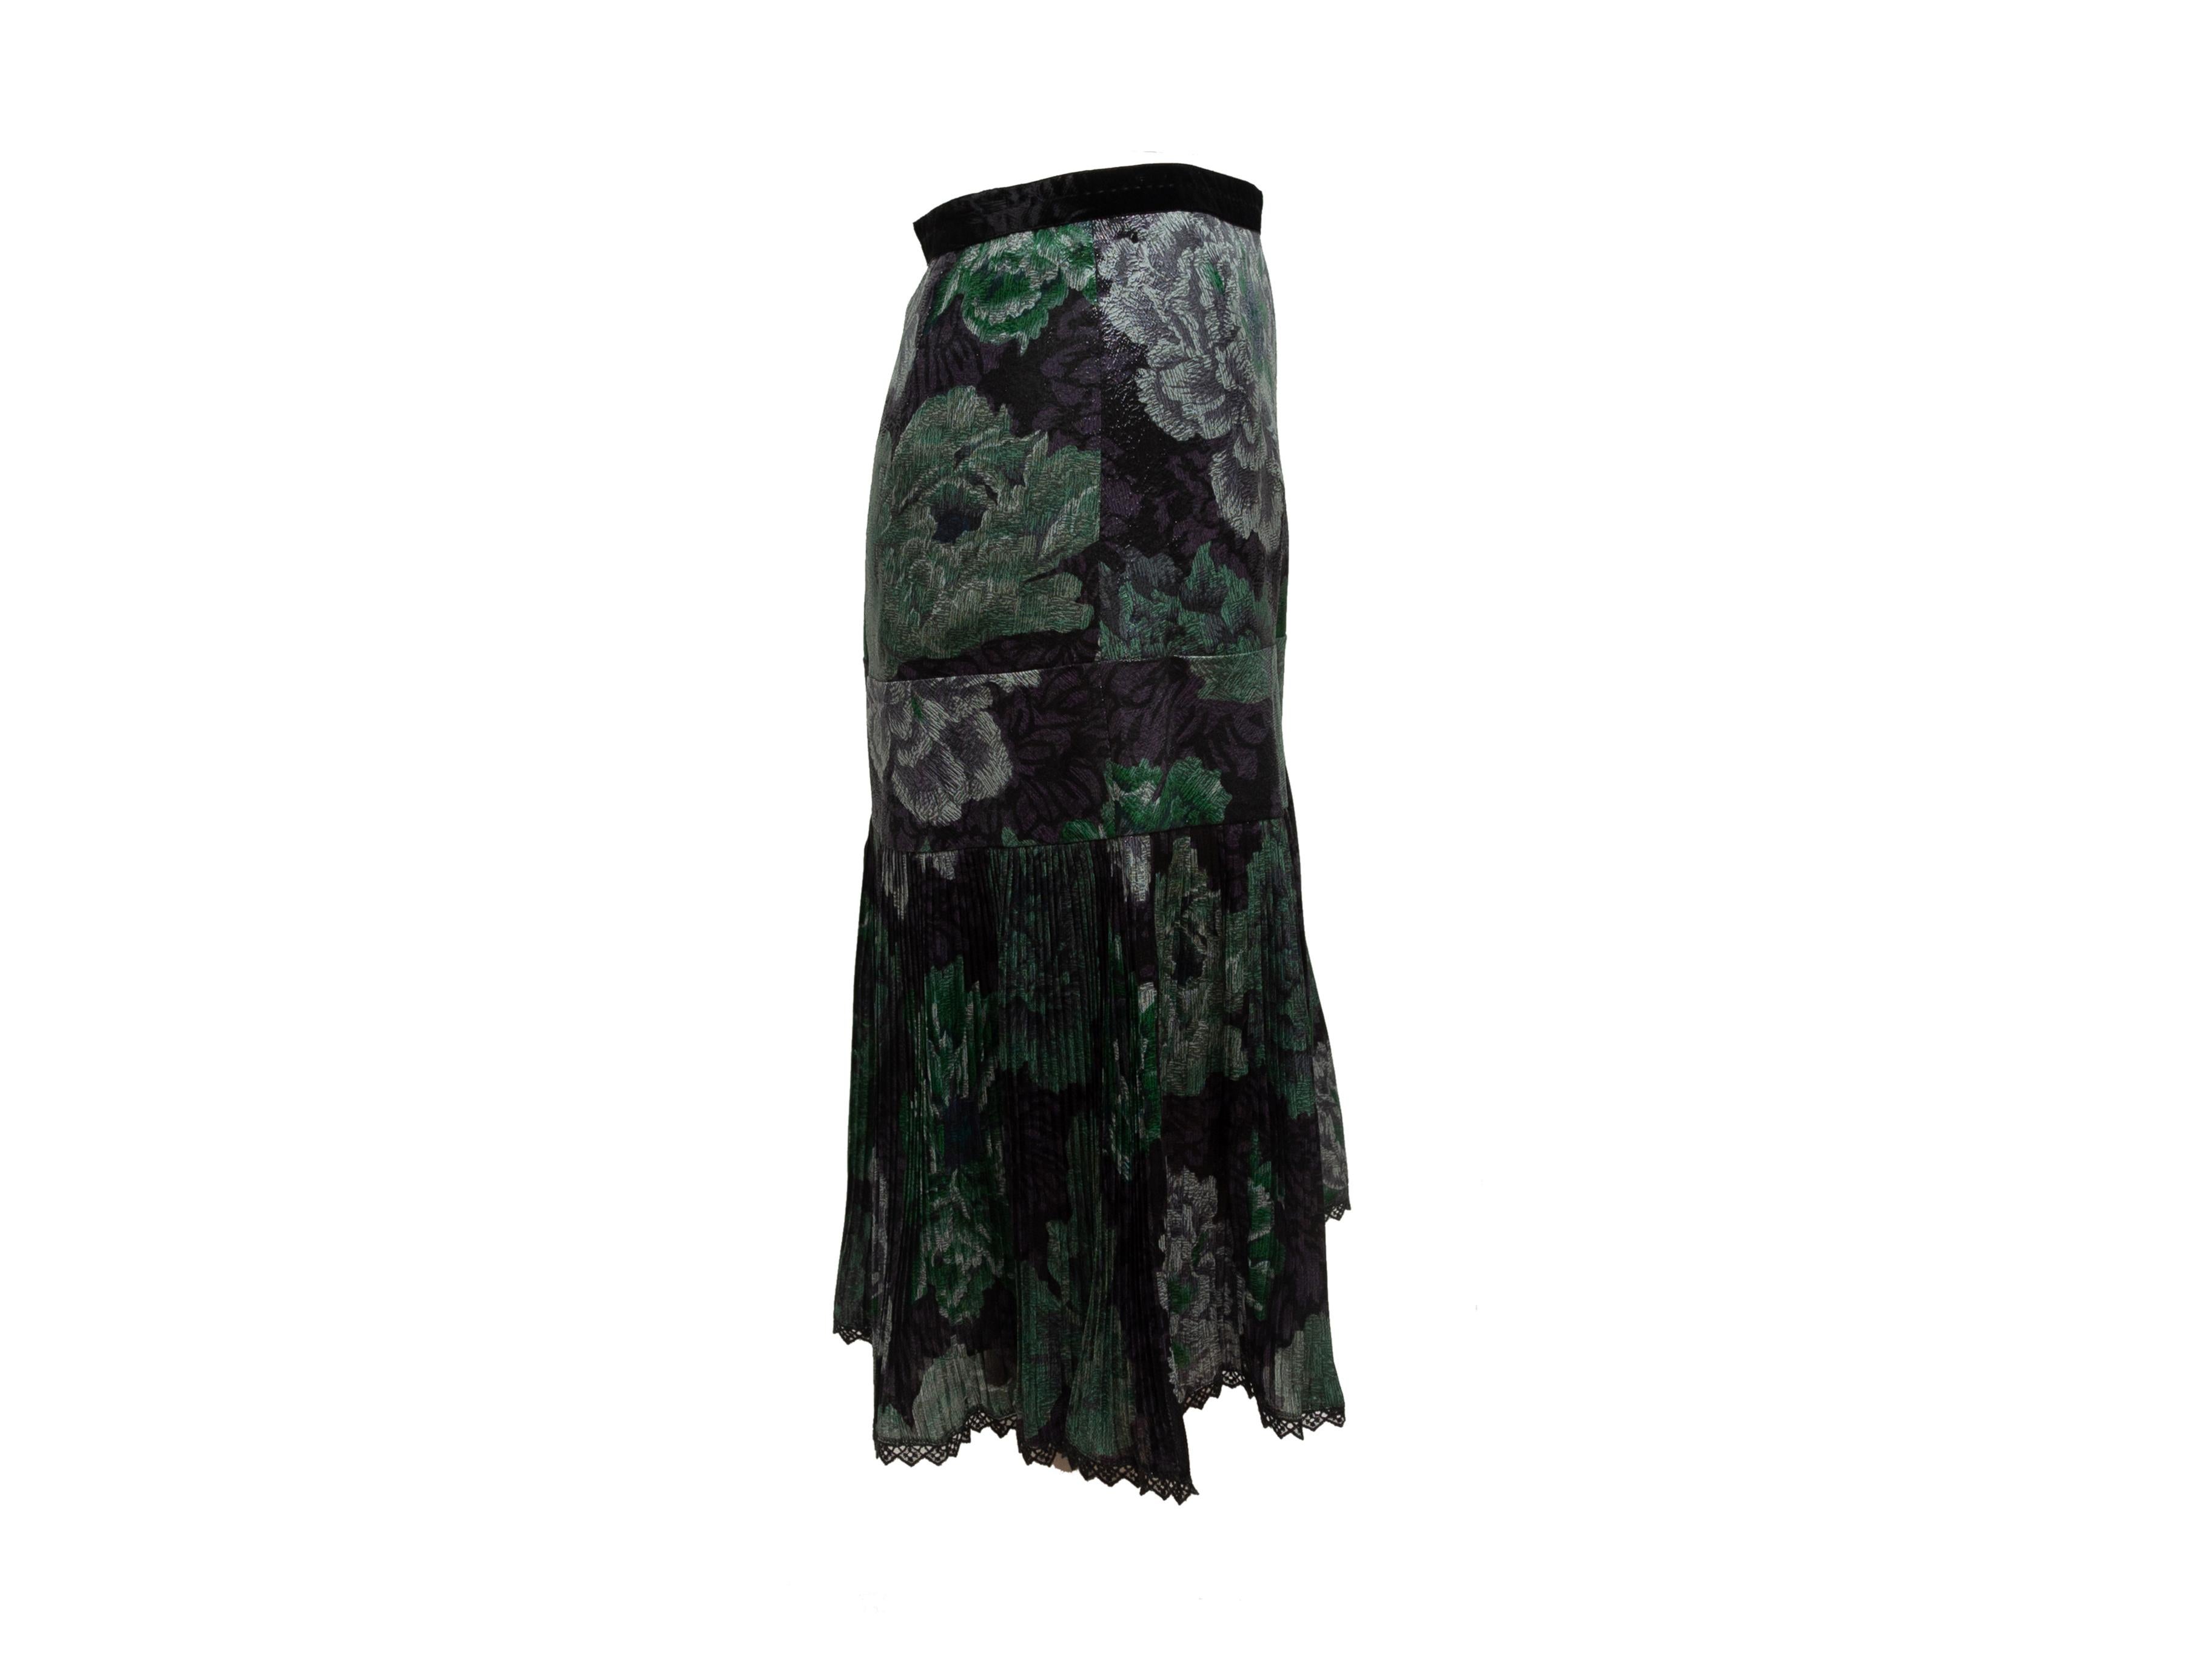 Product details: Black, green and eggplant silk skirt by Coach. Floral print throughout. 28